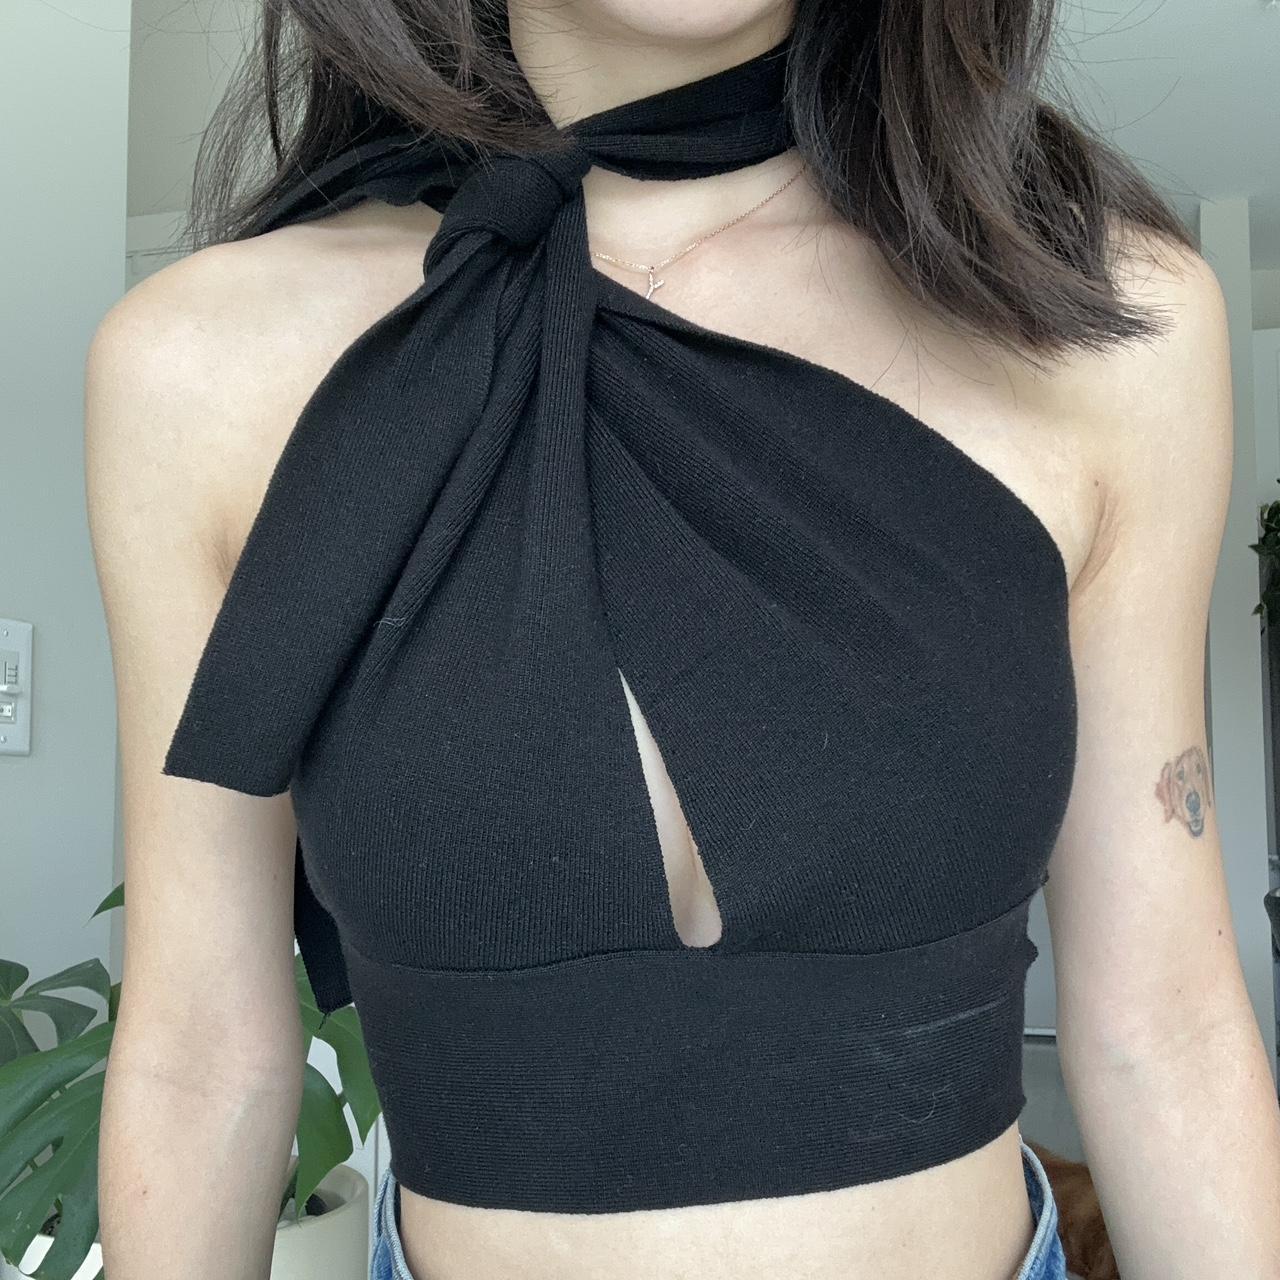 Urban Outfitters Black Halter Crop Top, Brand New With Tag